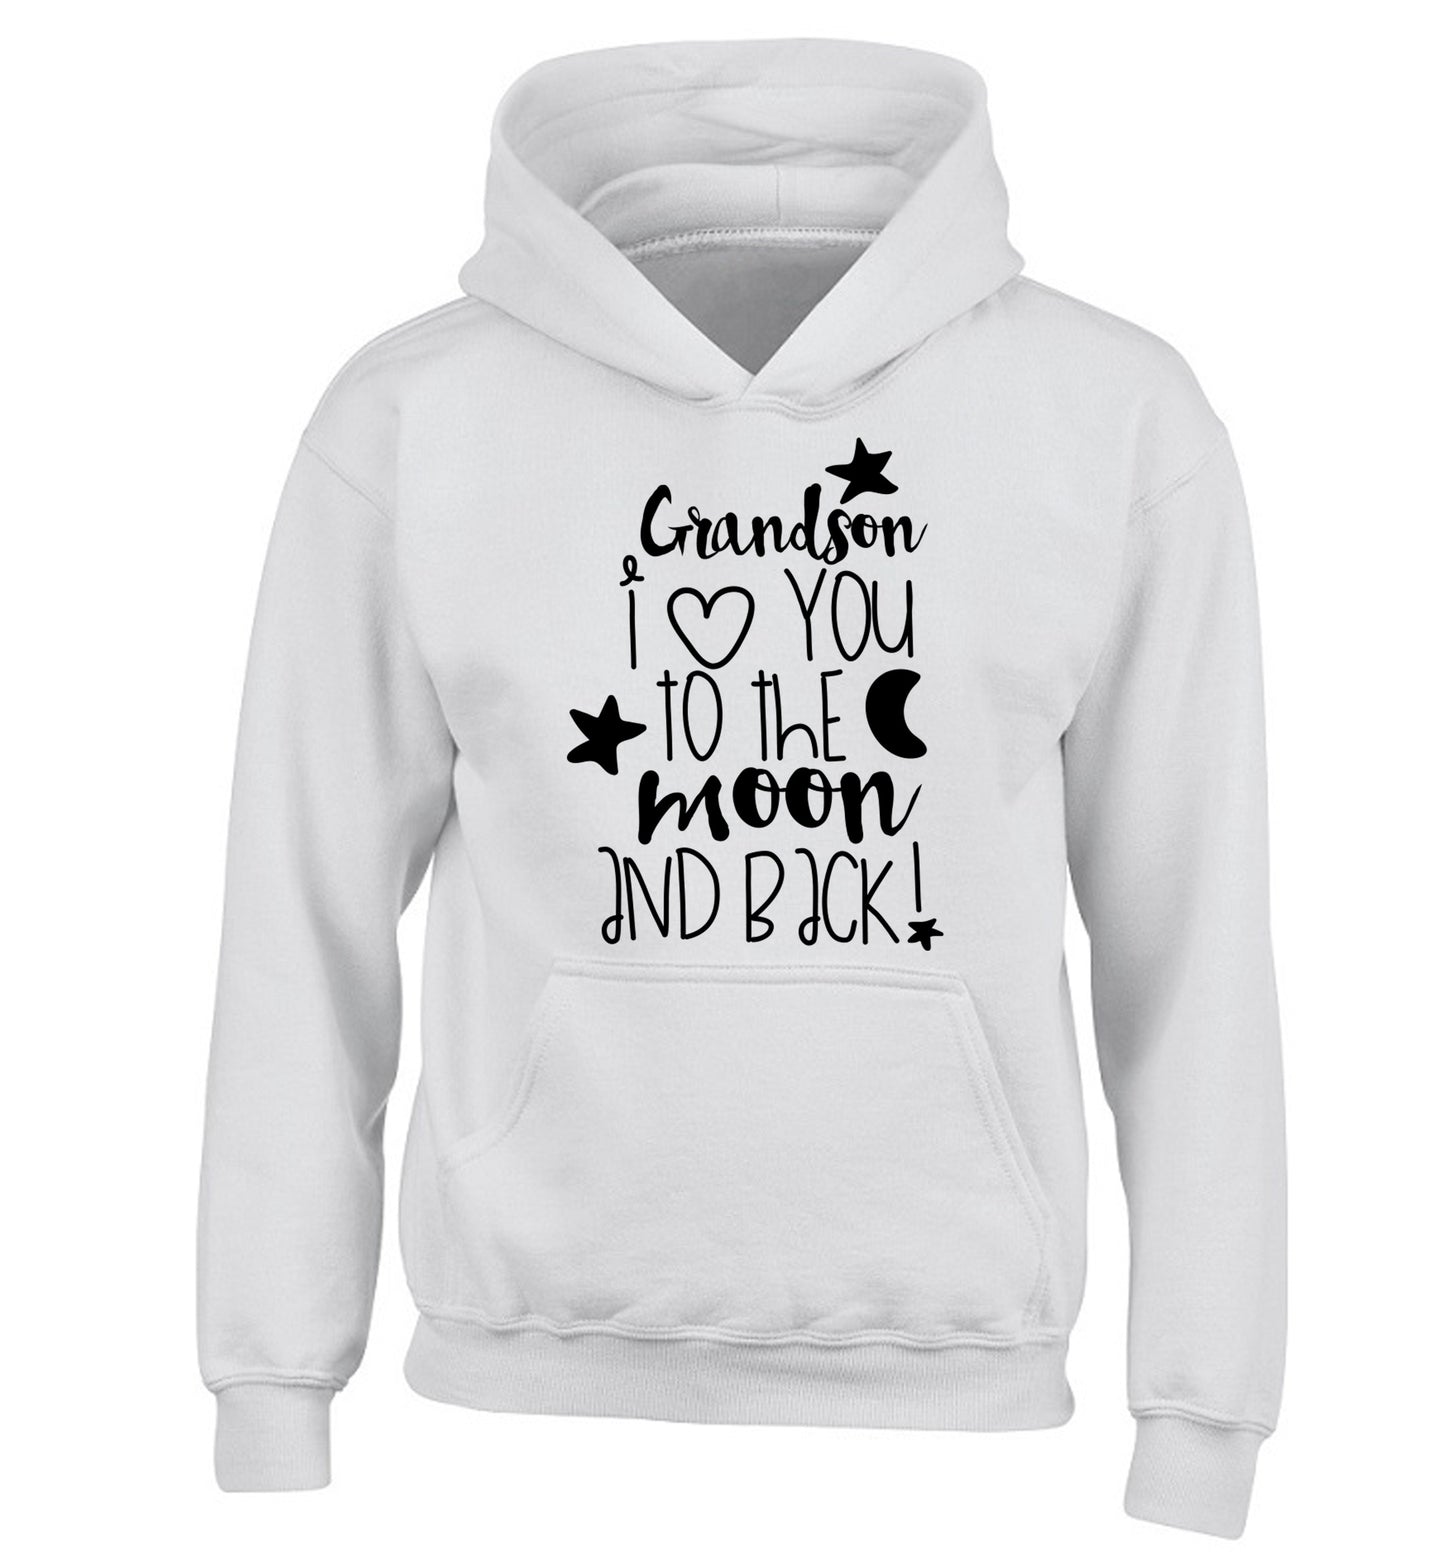 Grandson I love you to the moon and back children's white hoodie 12-14 Years